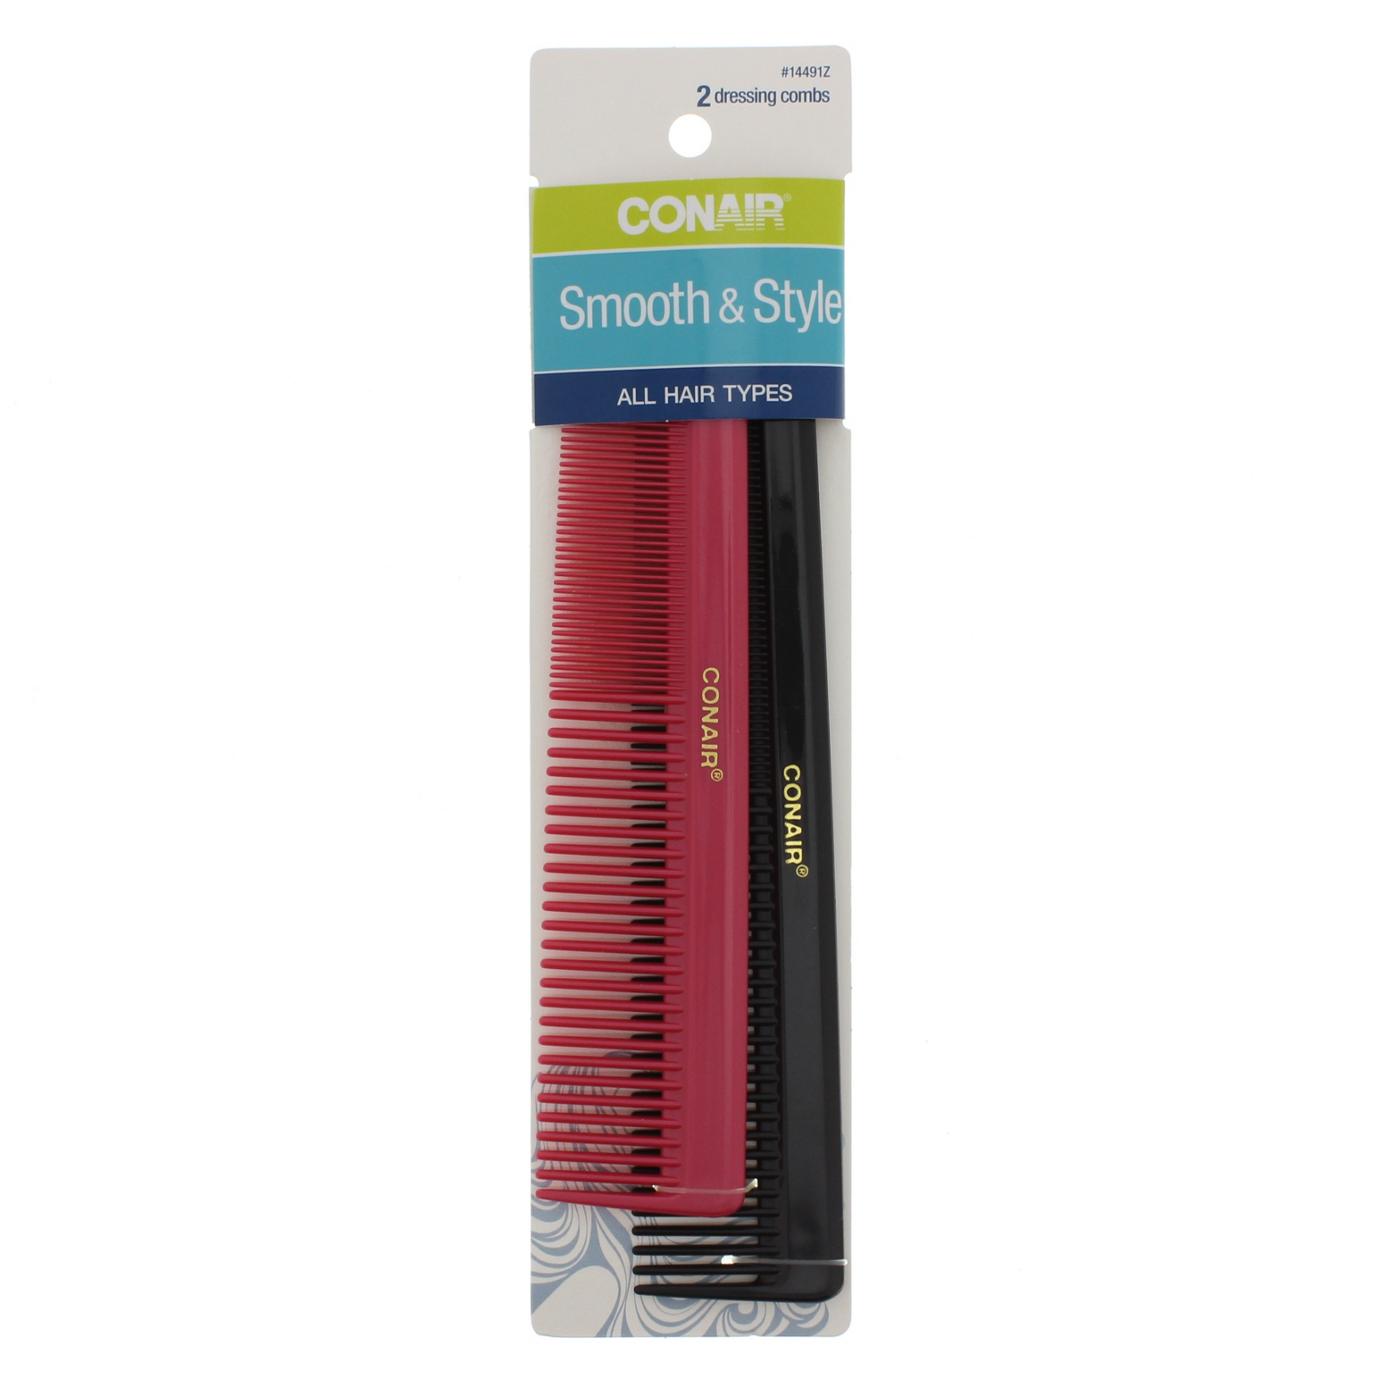 Conair Style and Smooth Combs, Assorted Colors; image 2 of 4